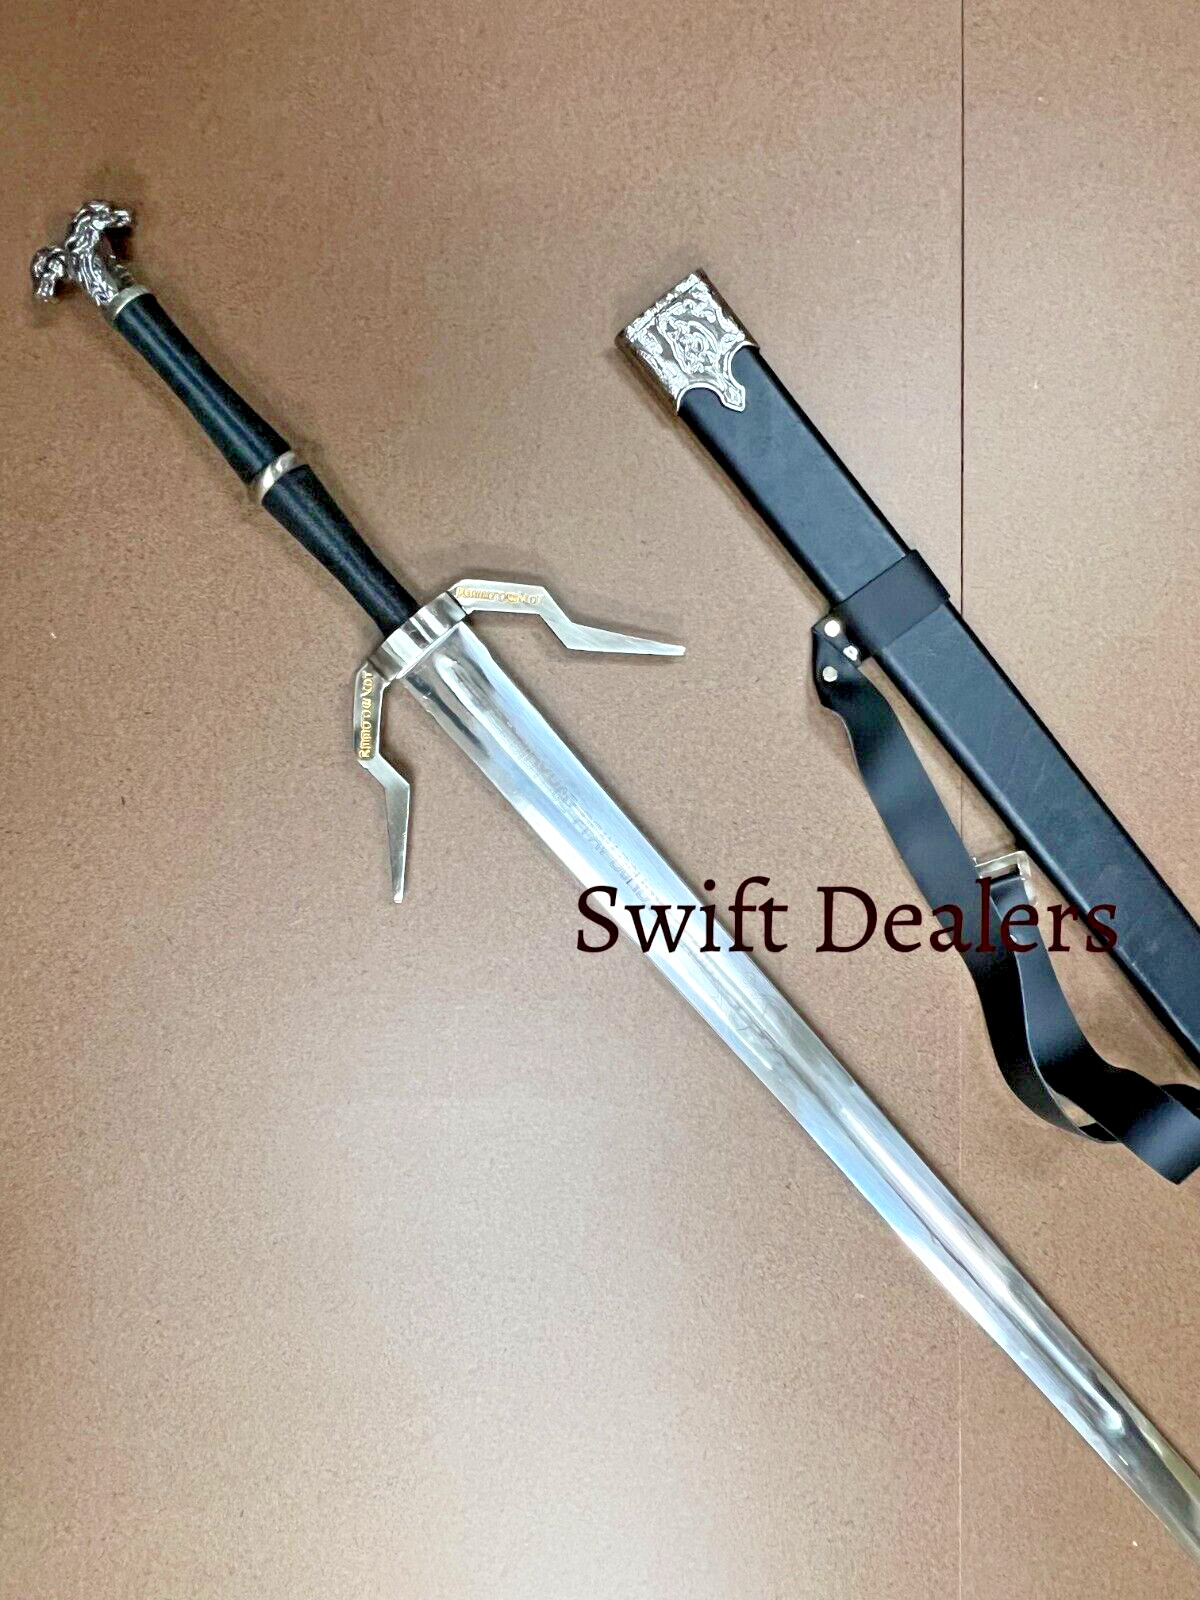 The Witcher Steel Sword of Geralt of Rivia Handmade Replica W/ Leather Sheath